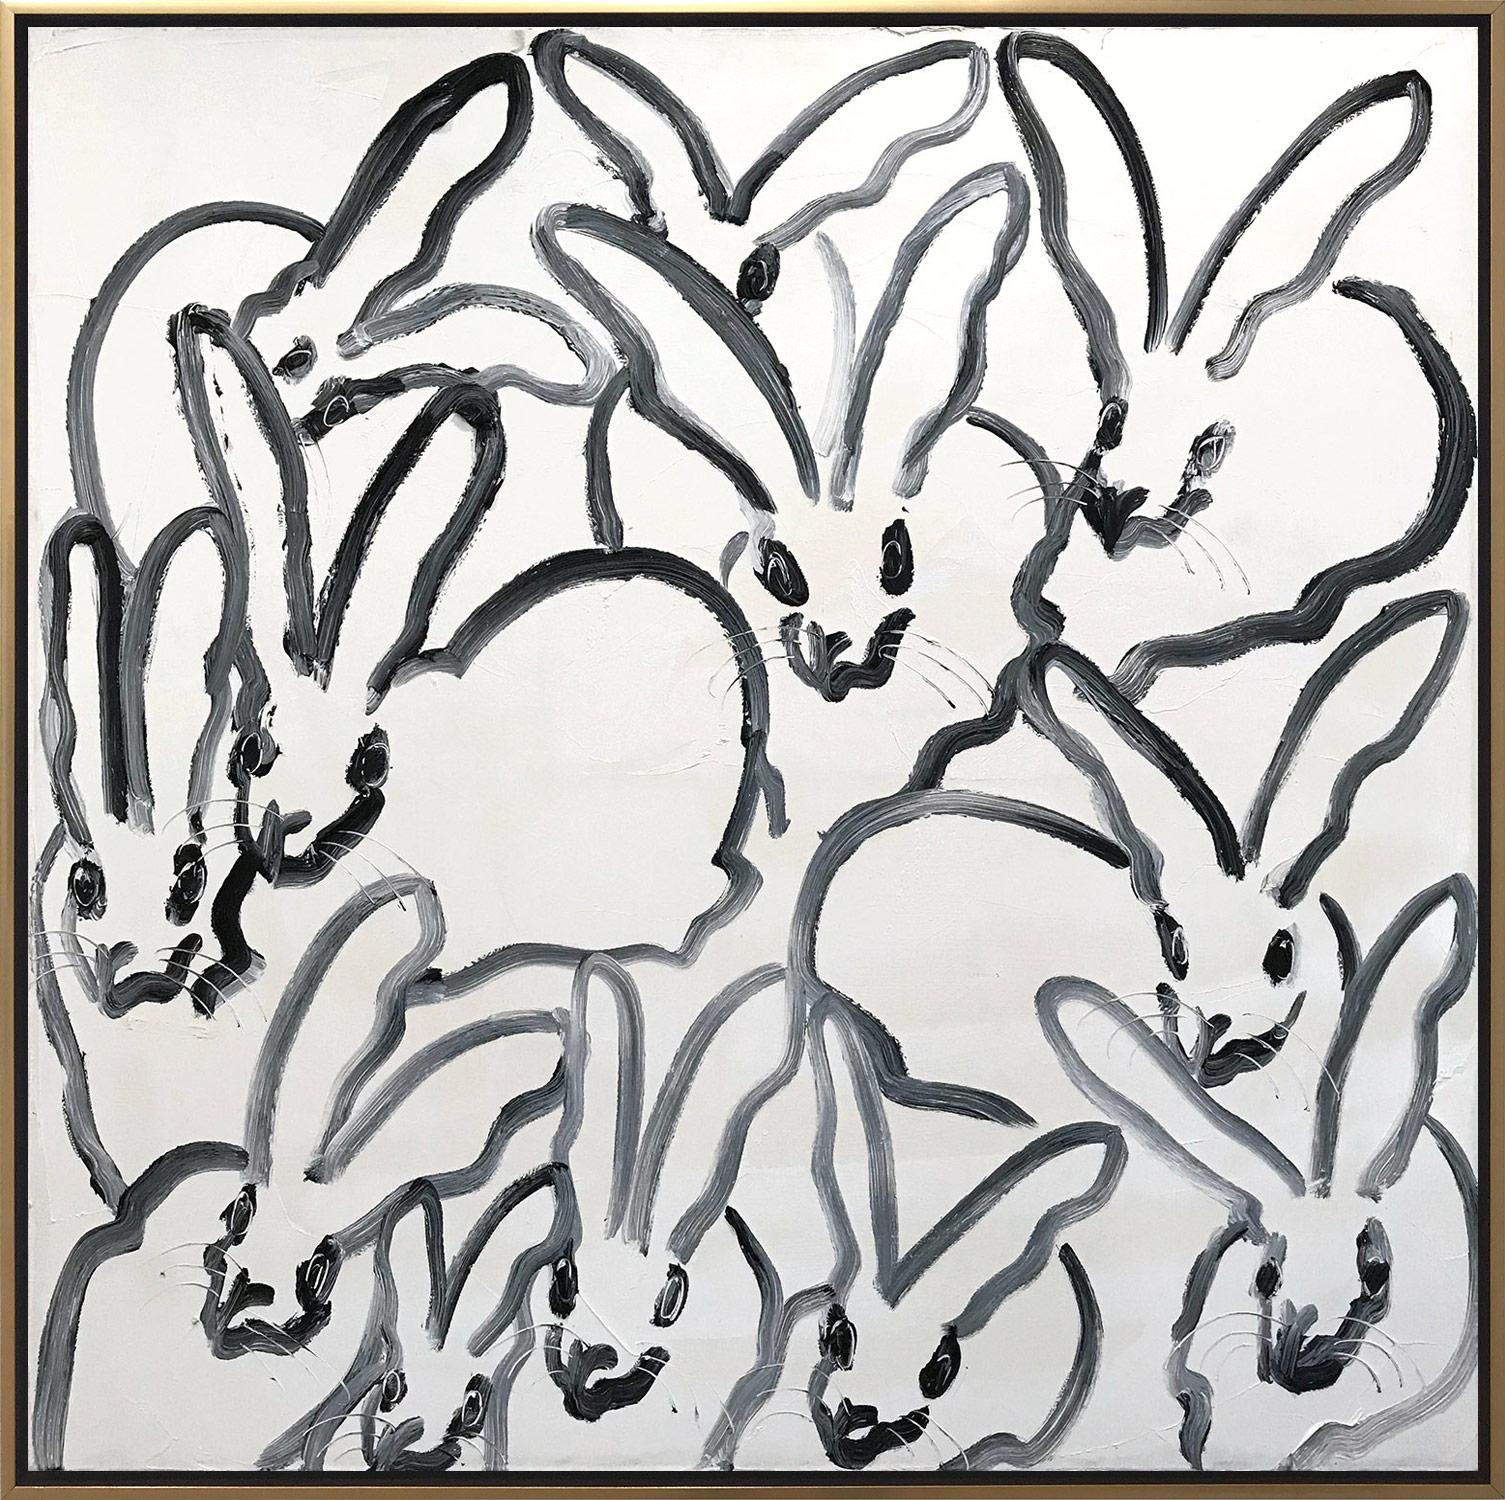 Hunt Slonem Abstract Painting - "Hutch" Black Outline Bunnies on White Background Oil Painting on Canvas